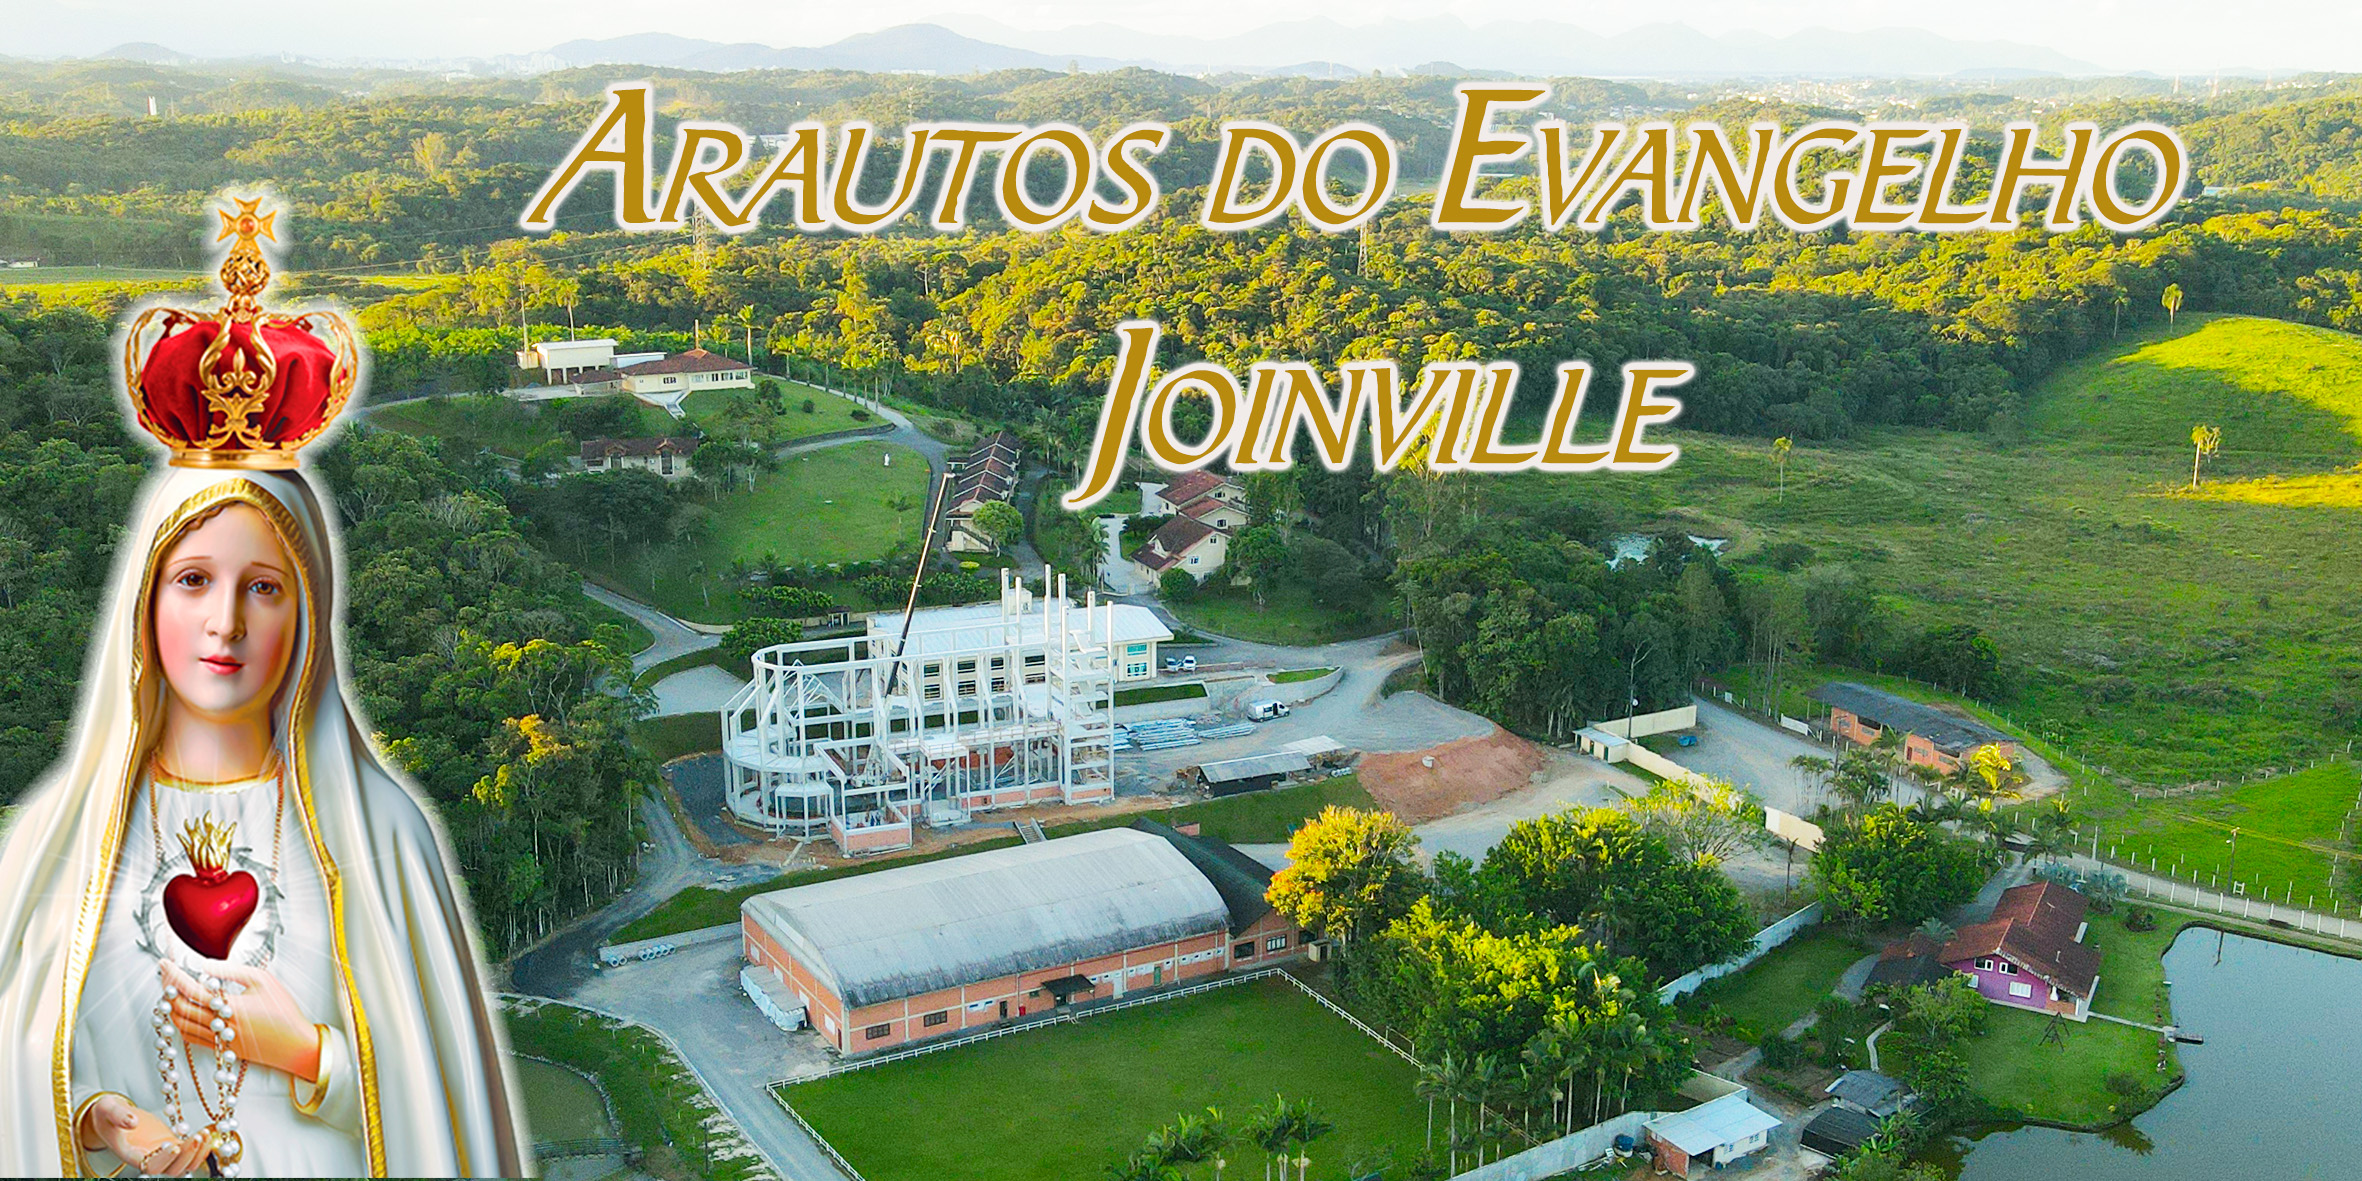 Arautos Joinville